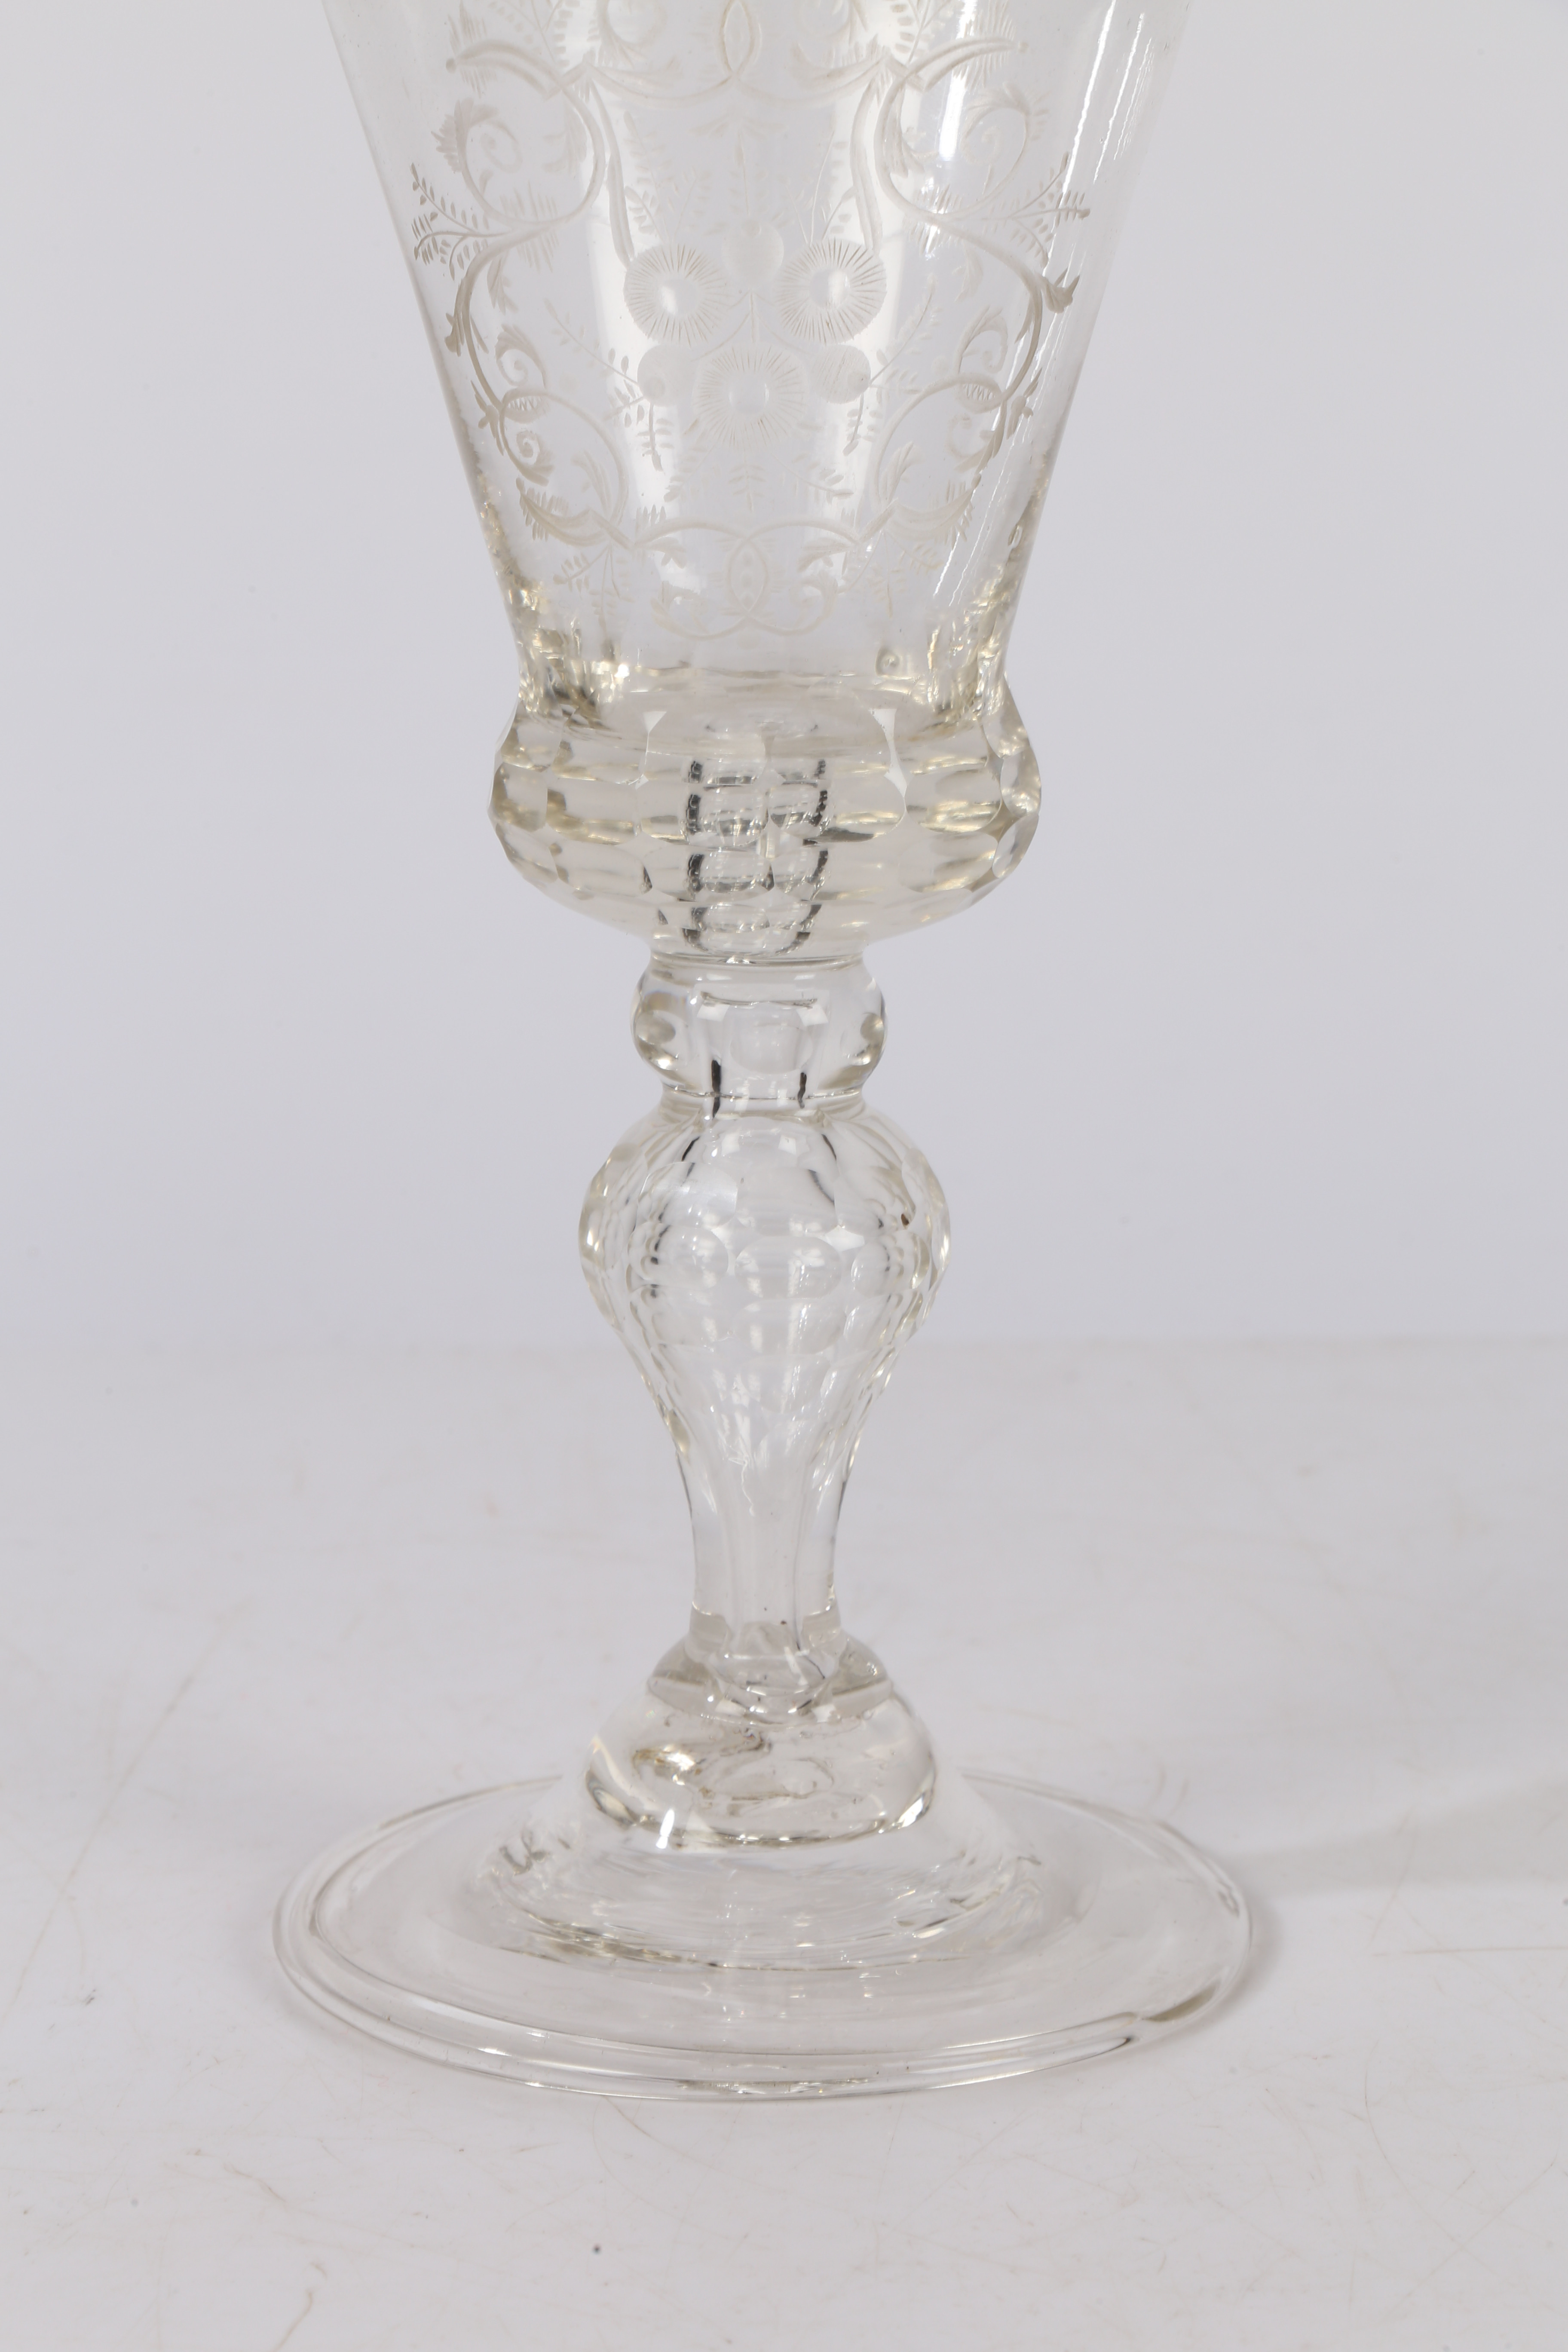 AN EARLY TO MID 18TH CENTURY BOHEMIAN GOBLET OF LARGE FORM. - Image 2 of 4